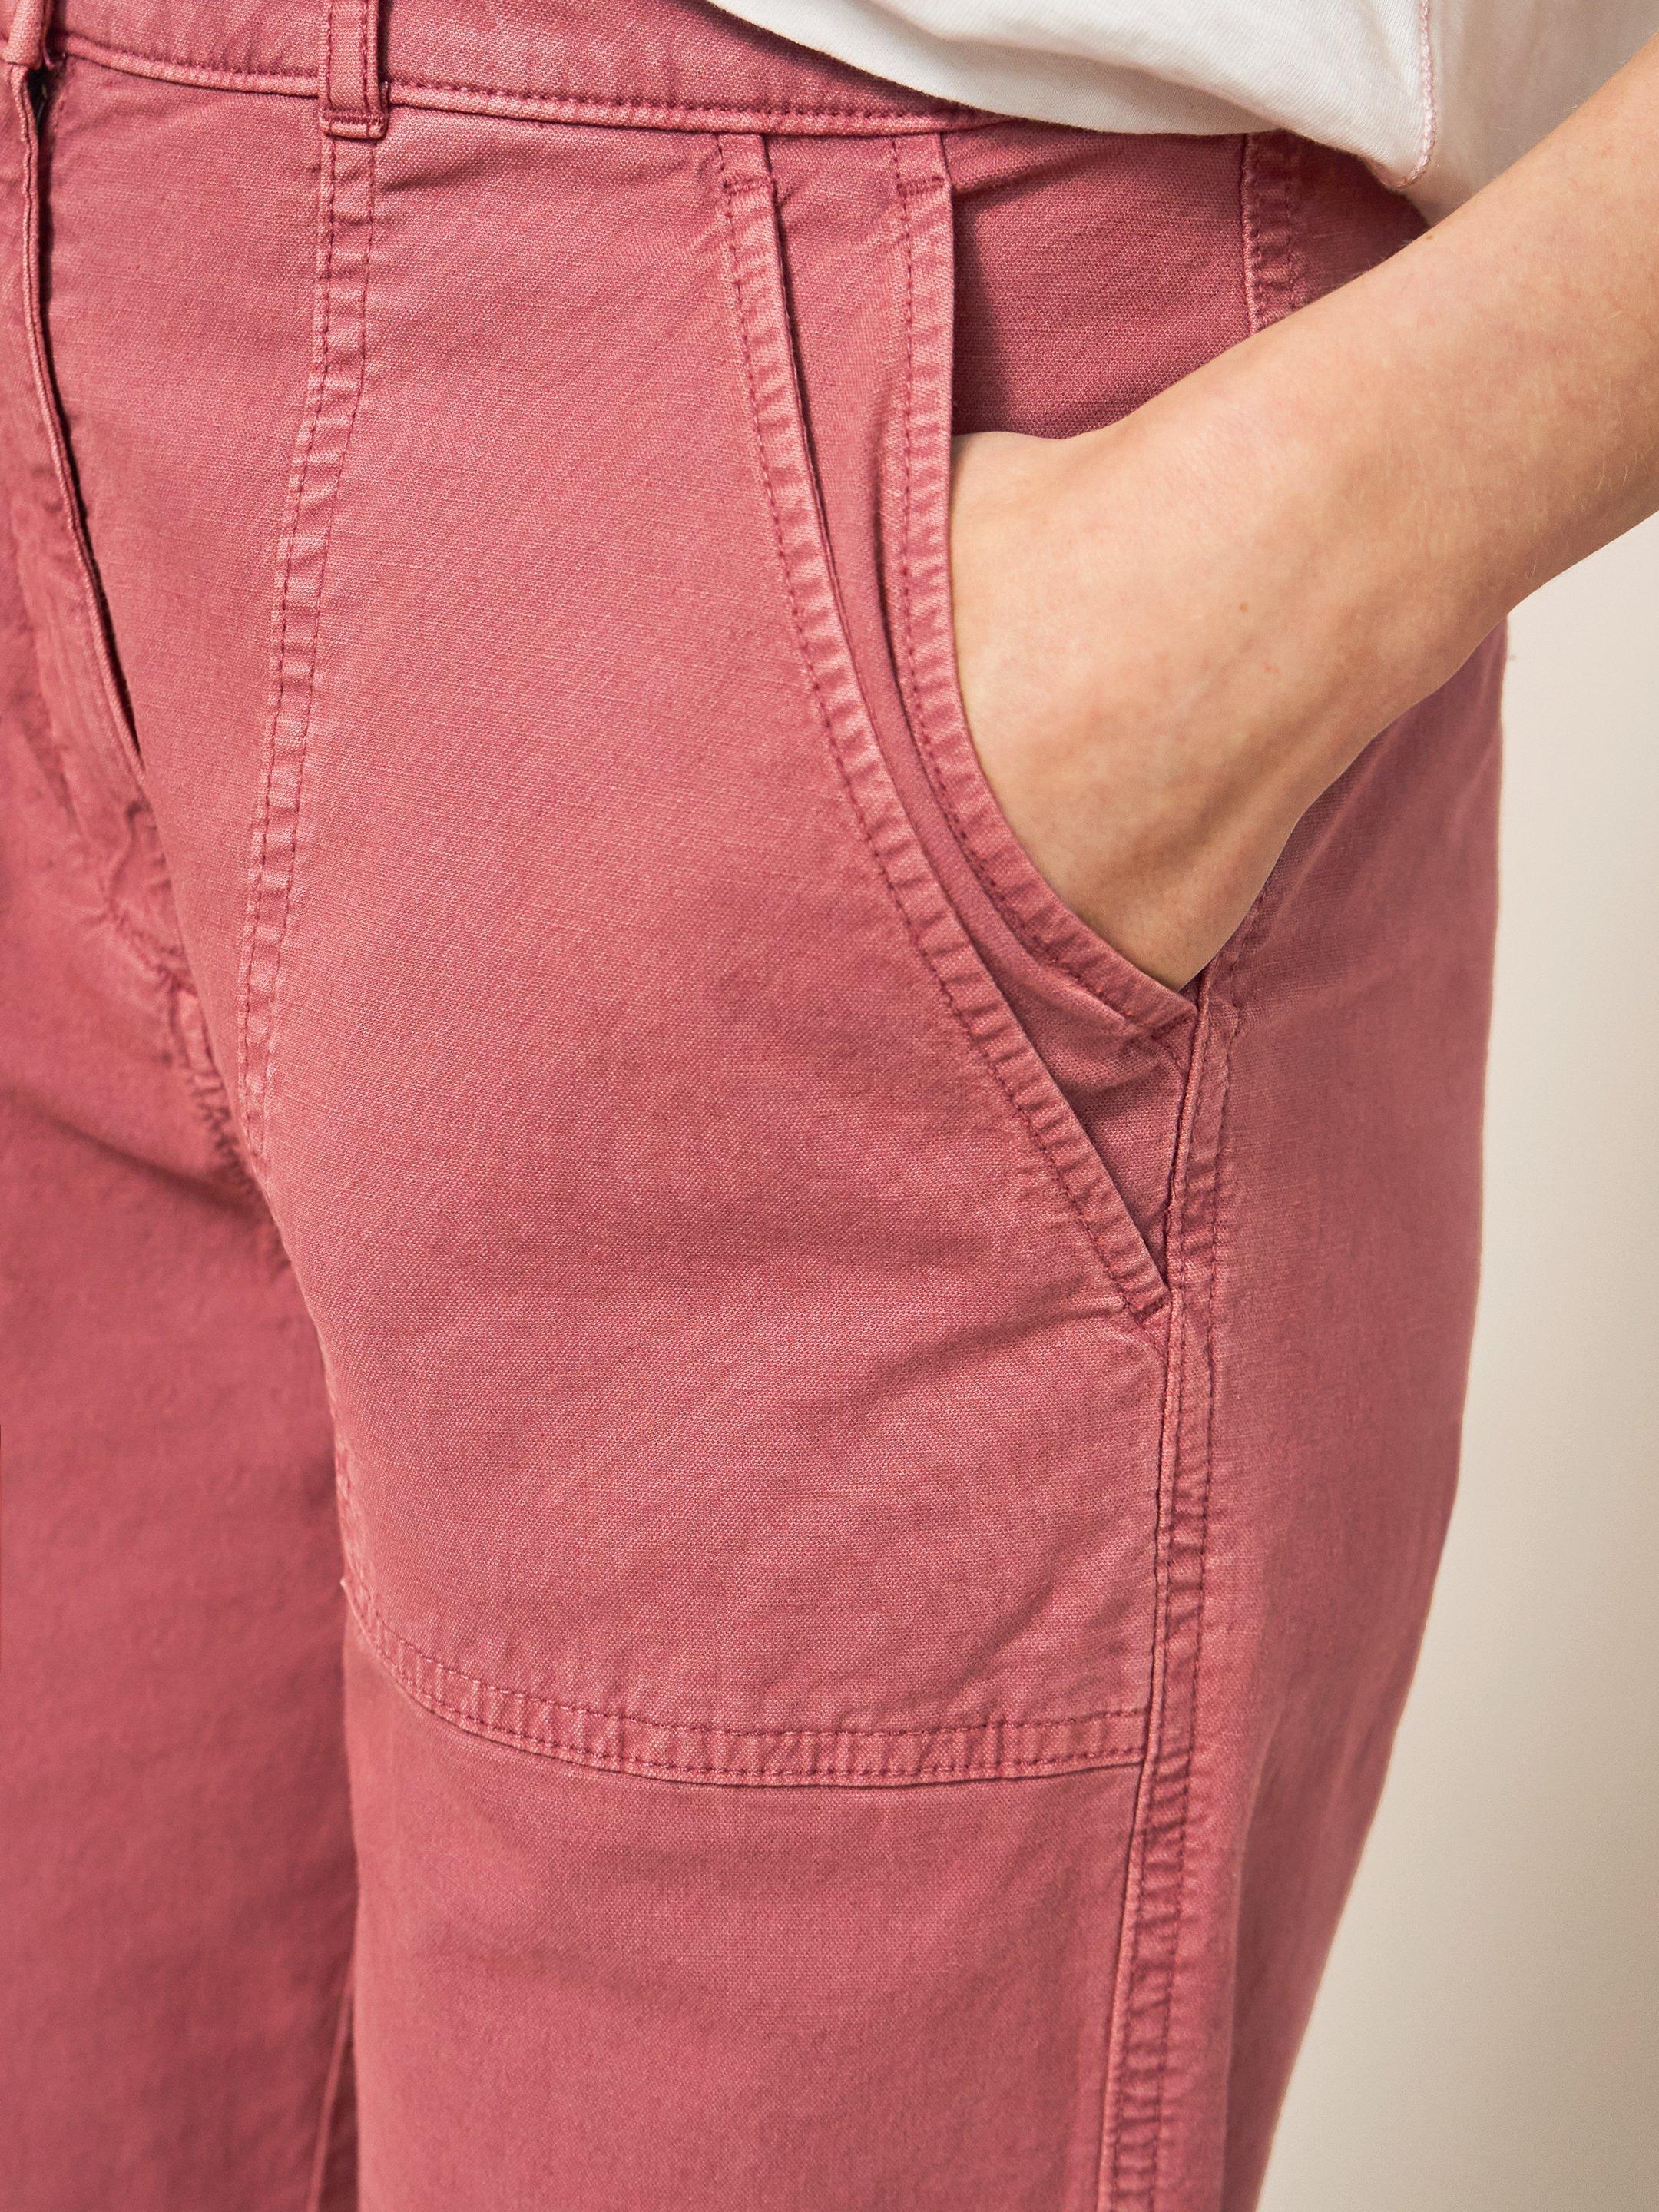 Twister Chino in MID PLUM - MODEL DETAIL